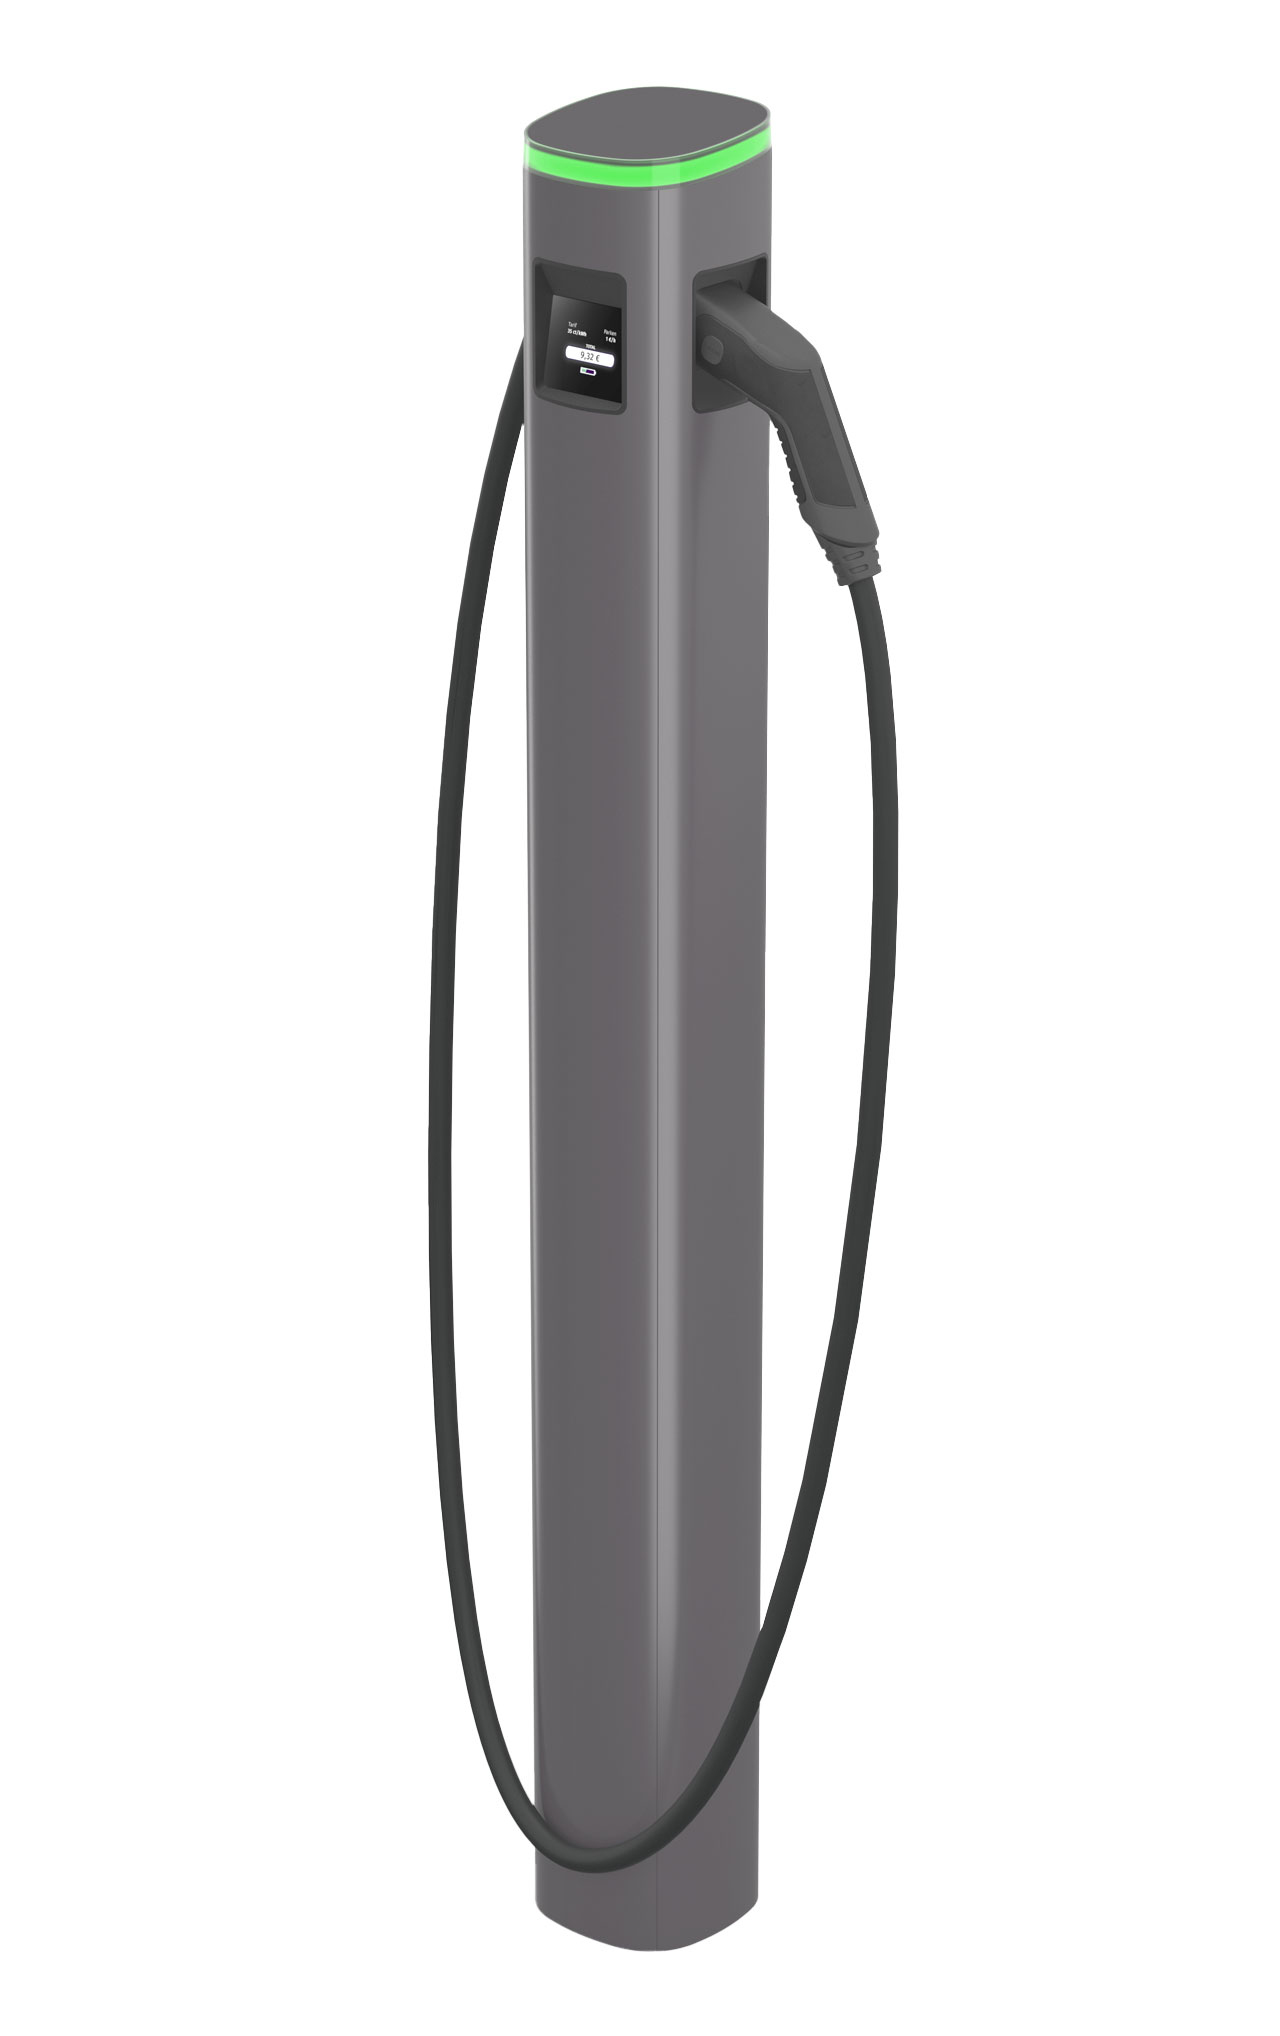 CHARGING column in gray with cable